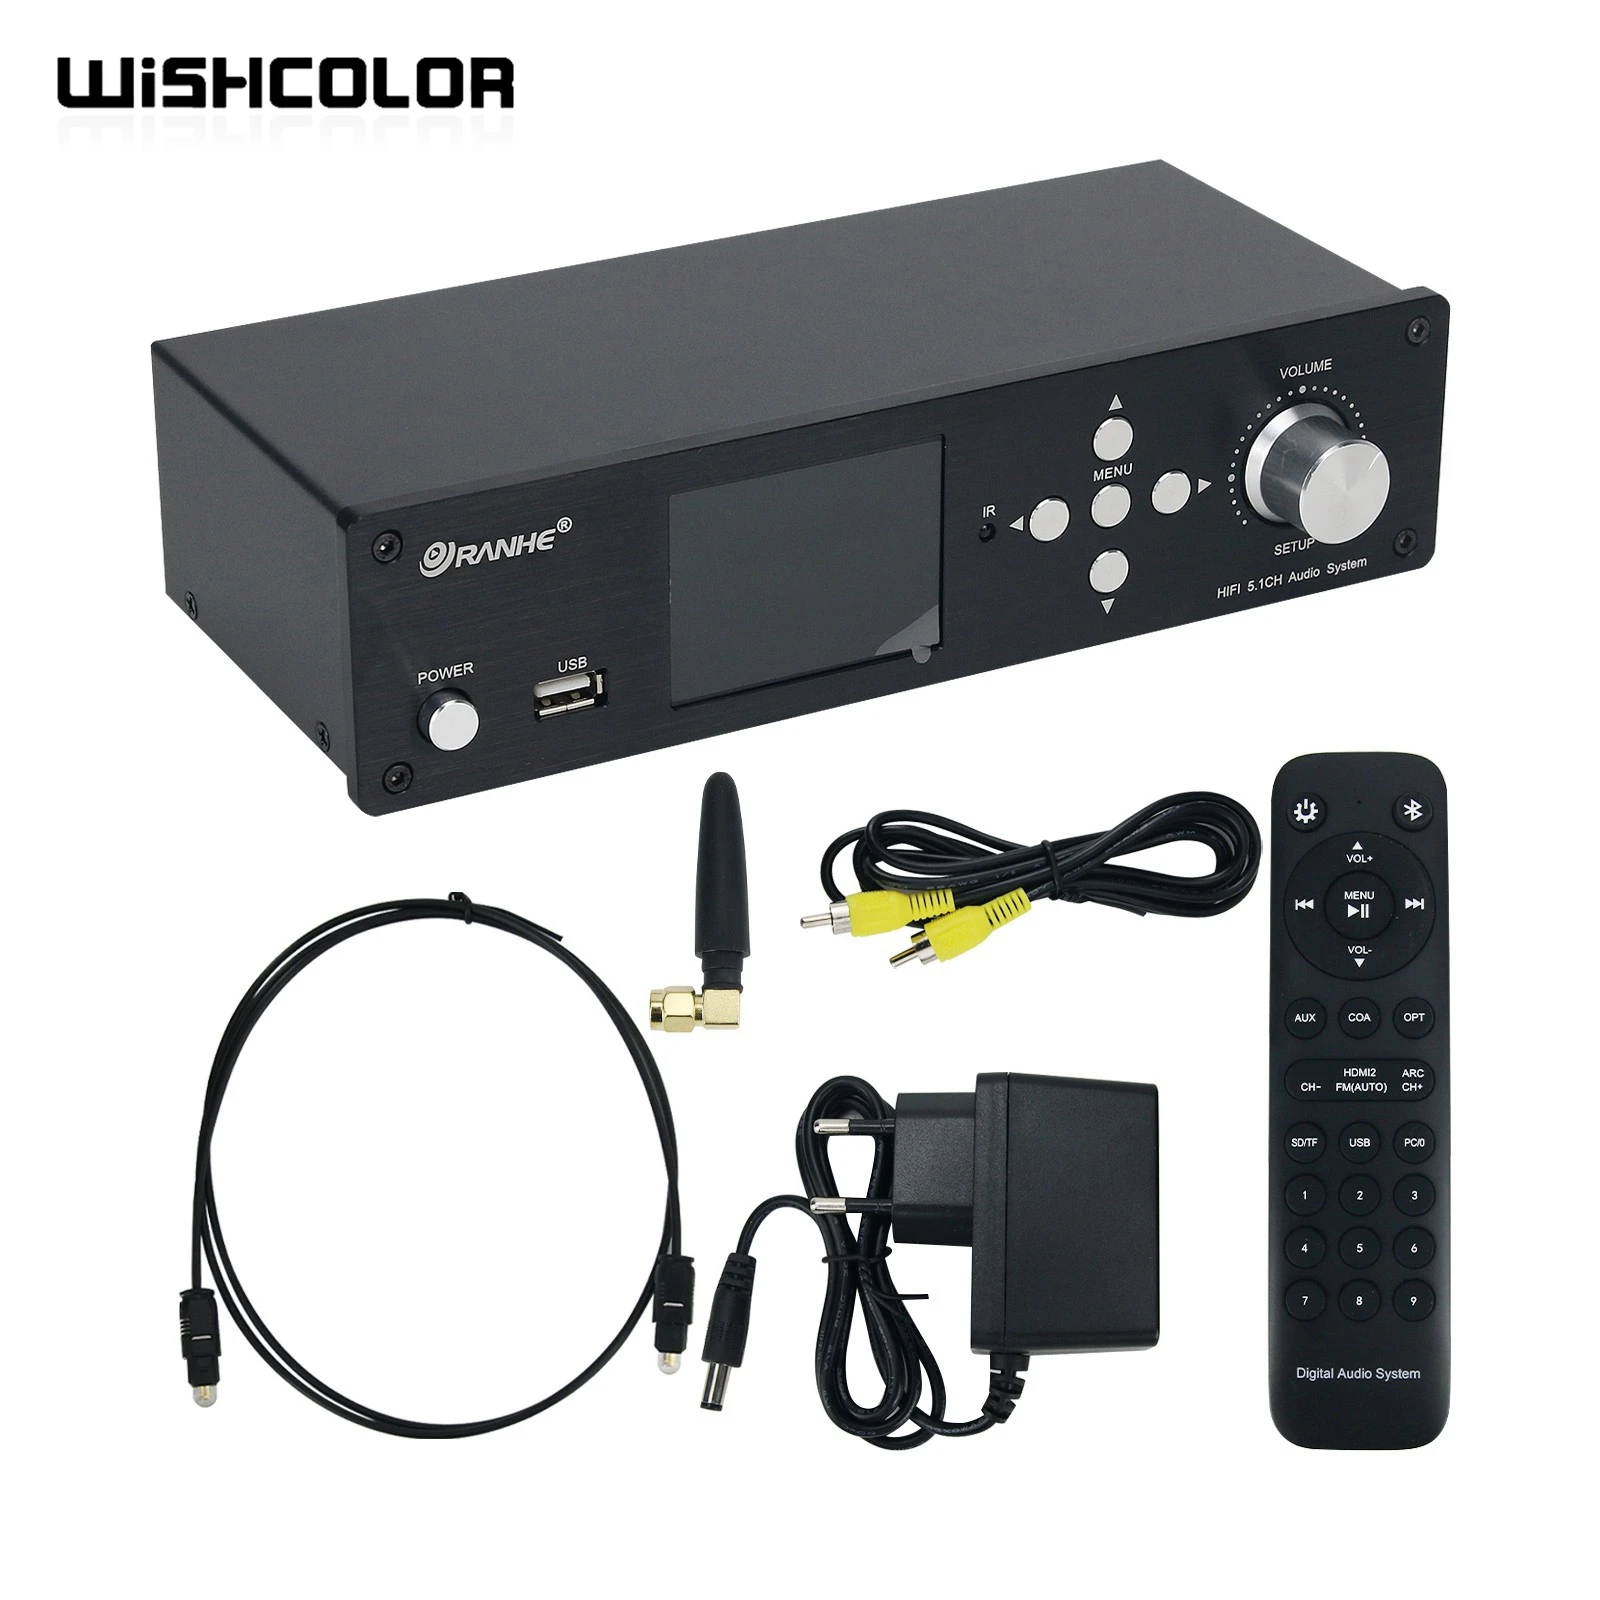 

Wishcolor RH-899X DSD USB Flash Drive Lossless Audio Player CS4354 HDMI-compatible Optical and Coaxial 5.1 Channel DTS Decoder